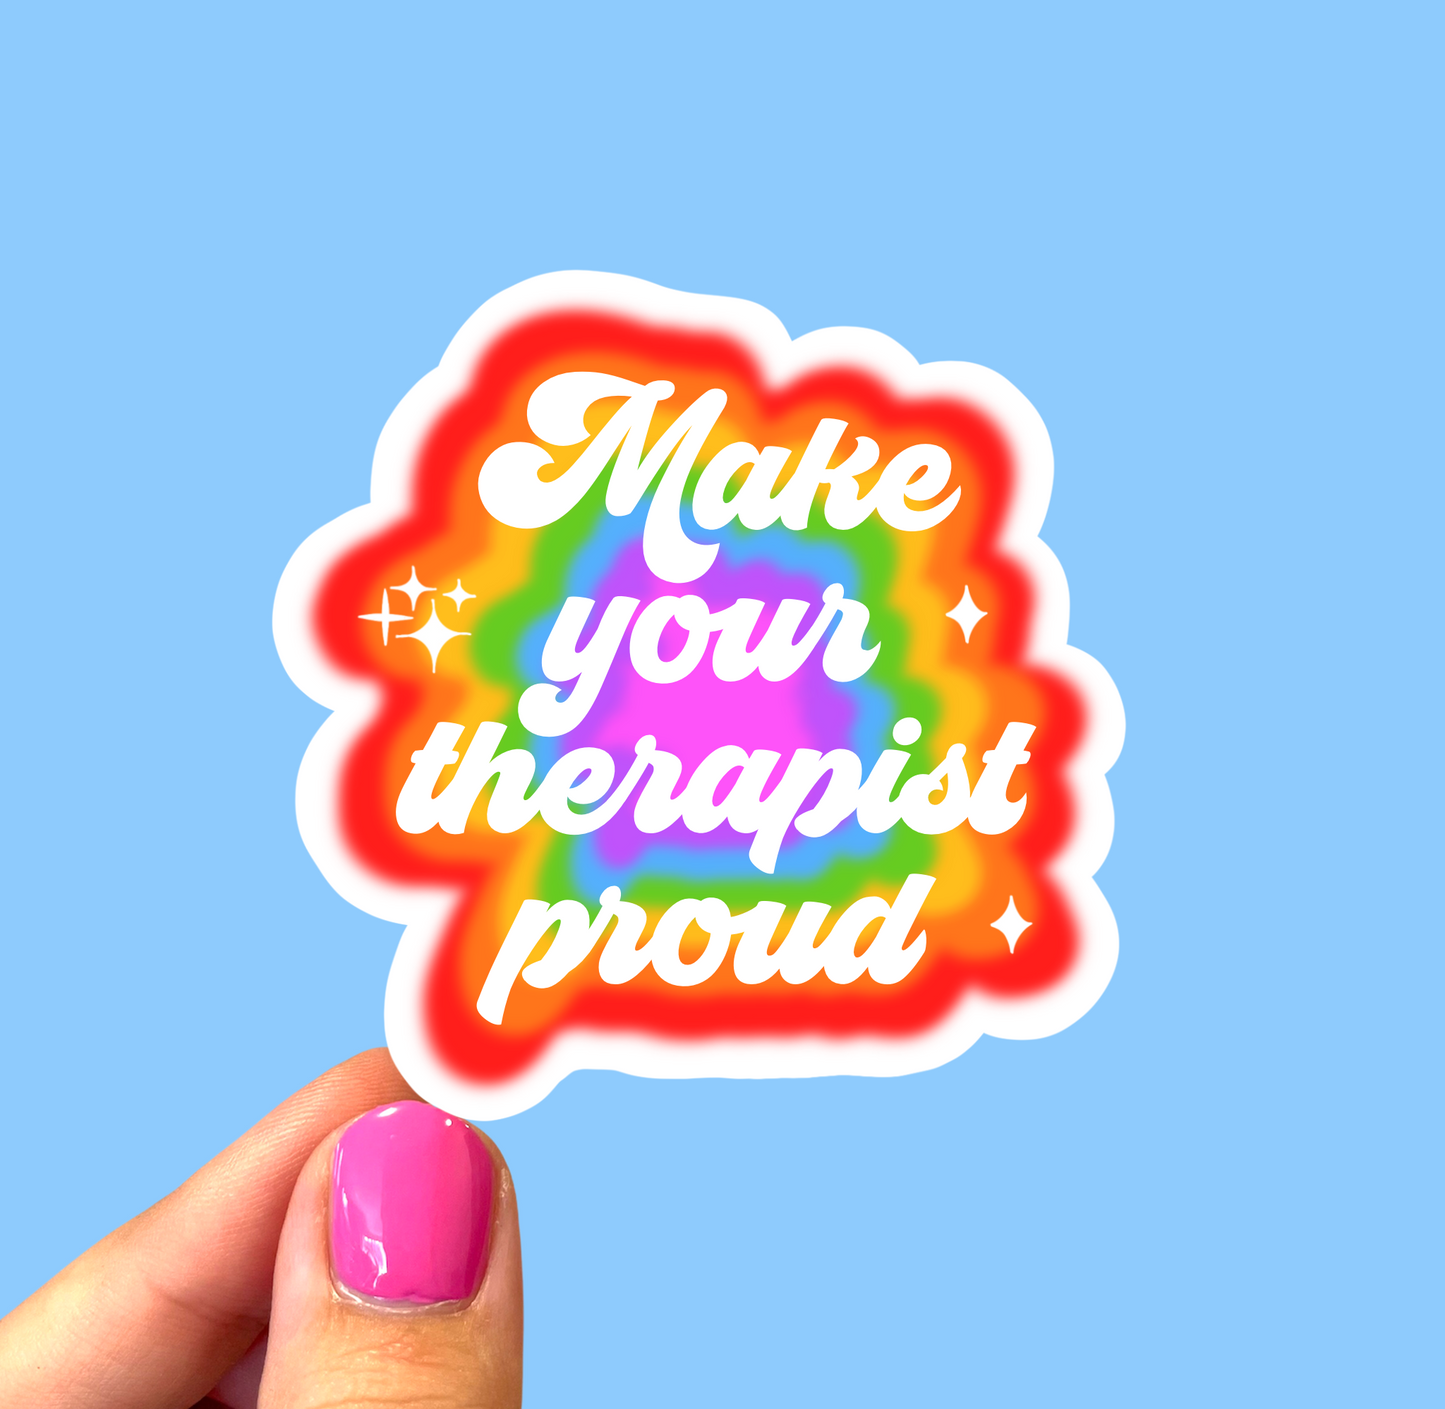 Make your therapist proud